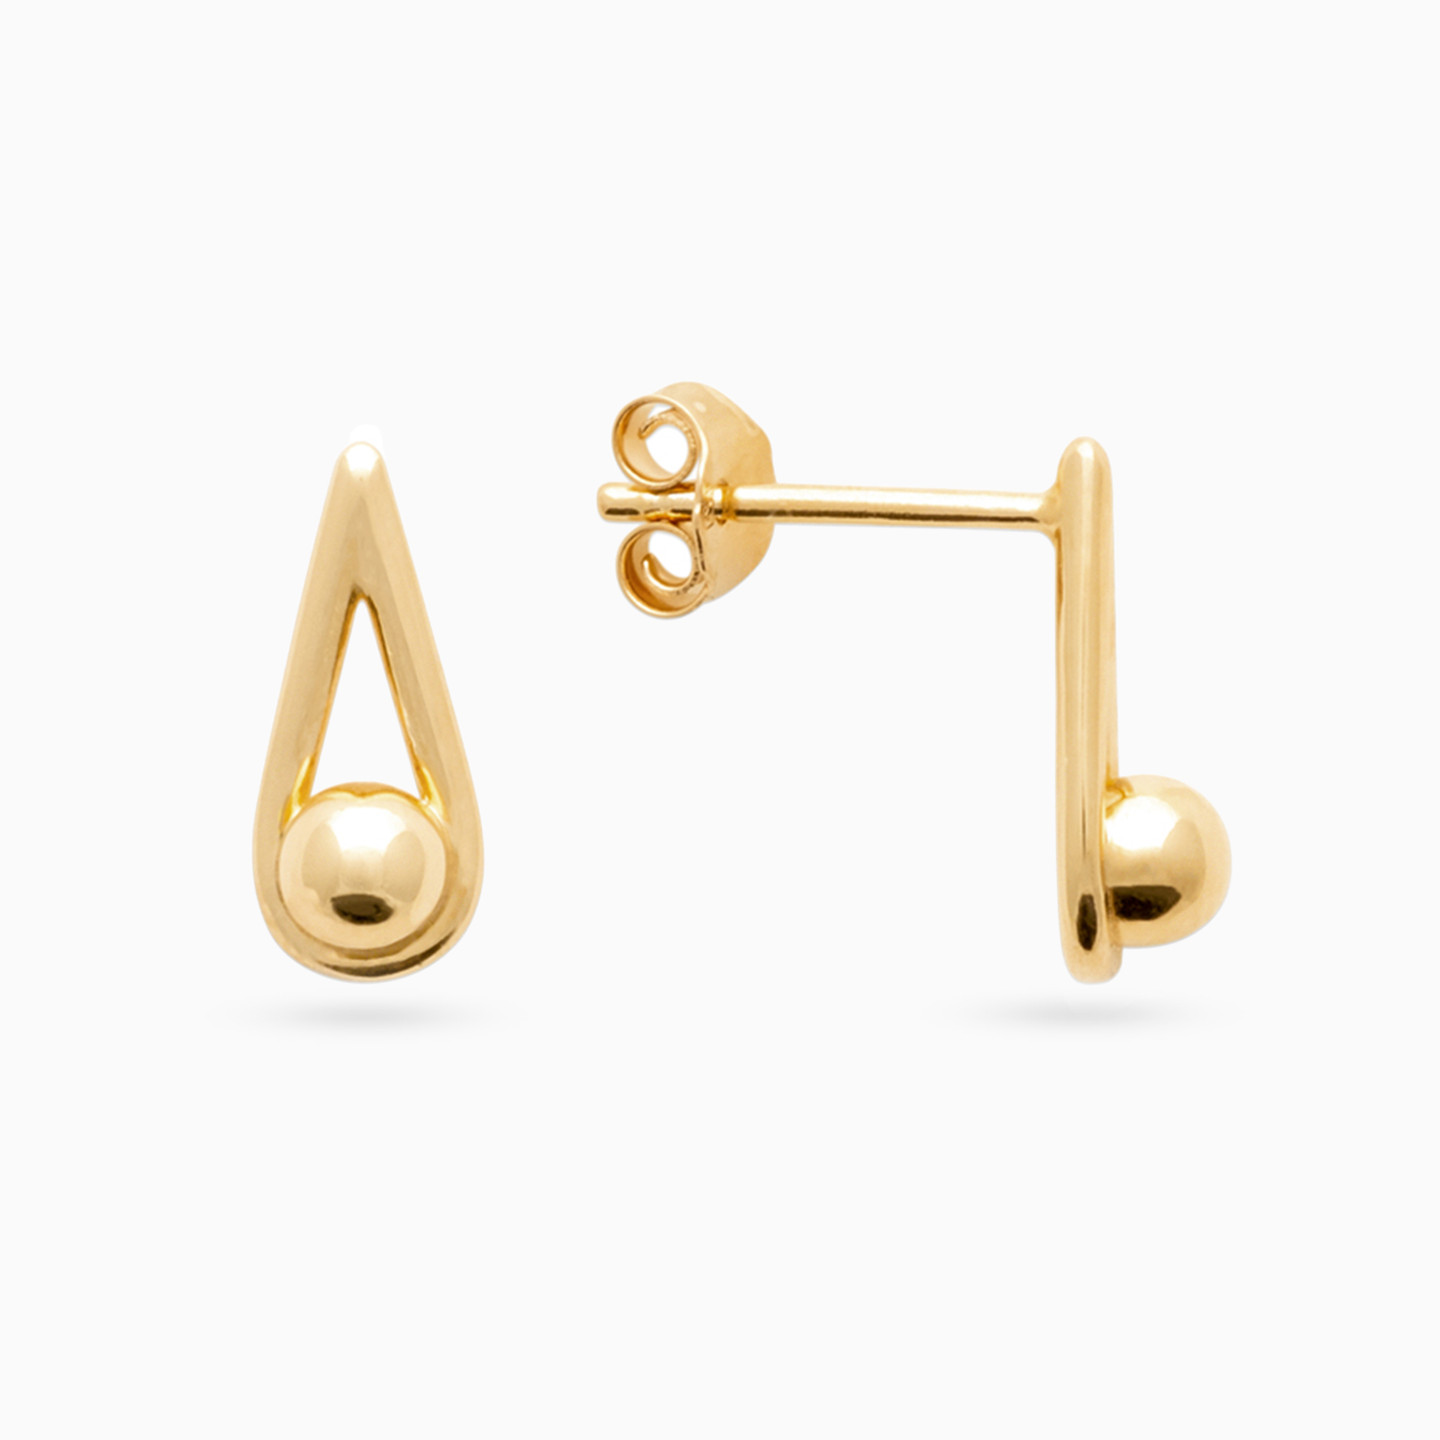 Gold Plated Stud Earrings - 3